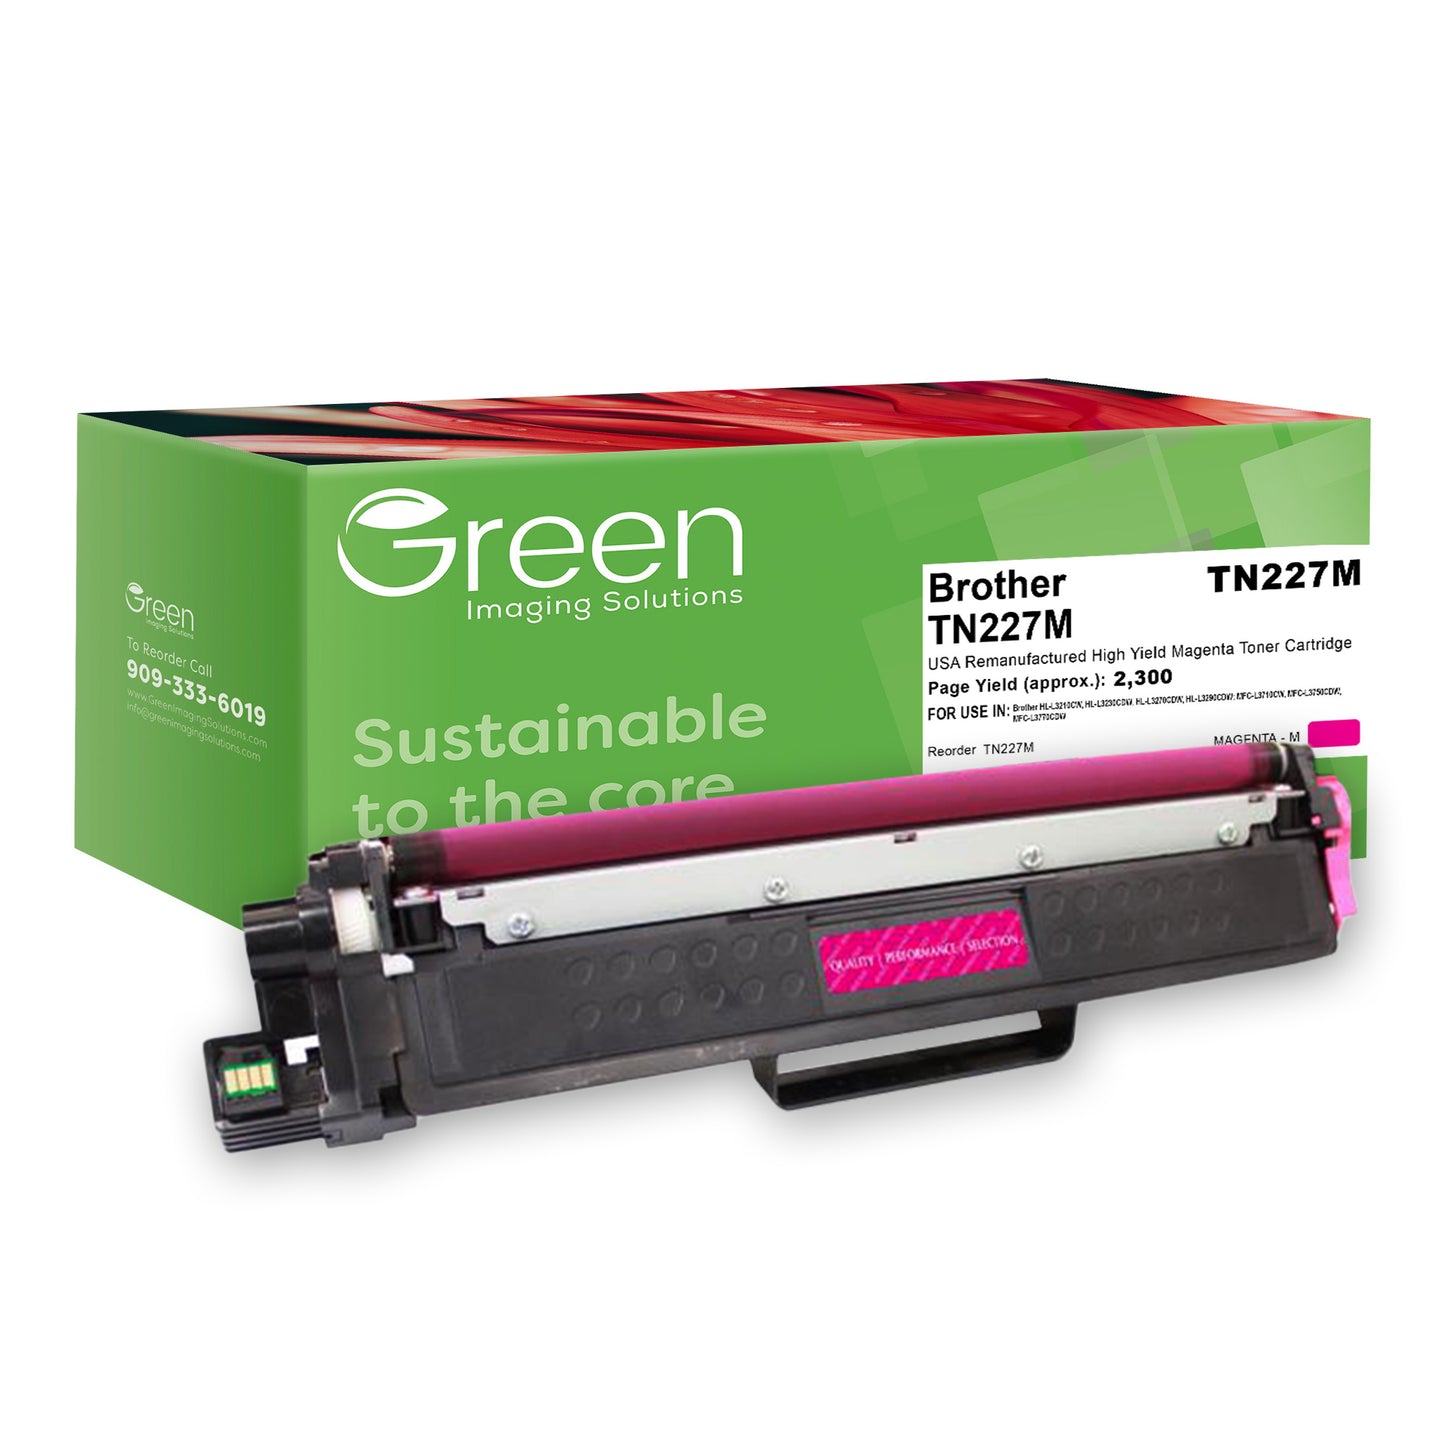 Green Imaging Solutions USA Remanufactured High Yield Magenta Toner Cartridge for Brother TN227